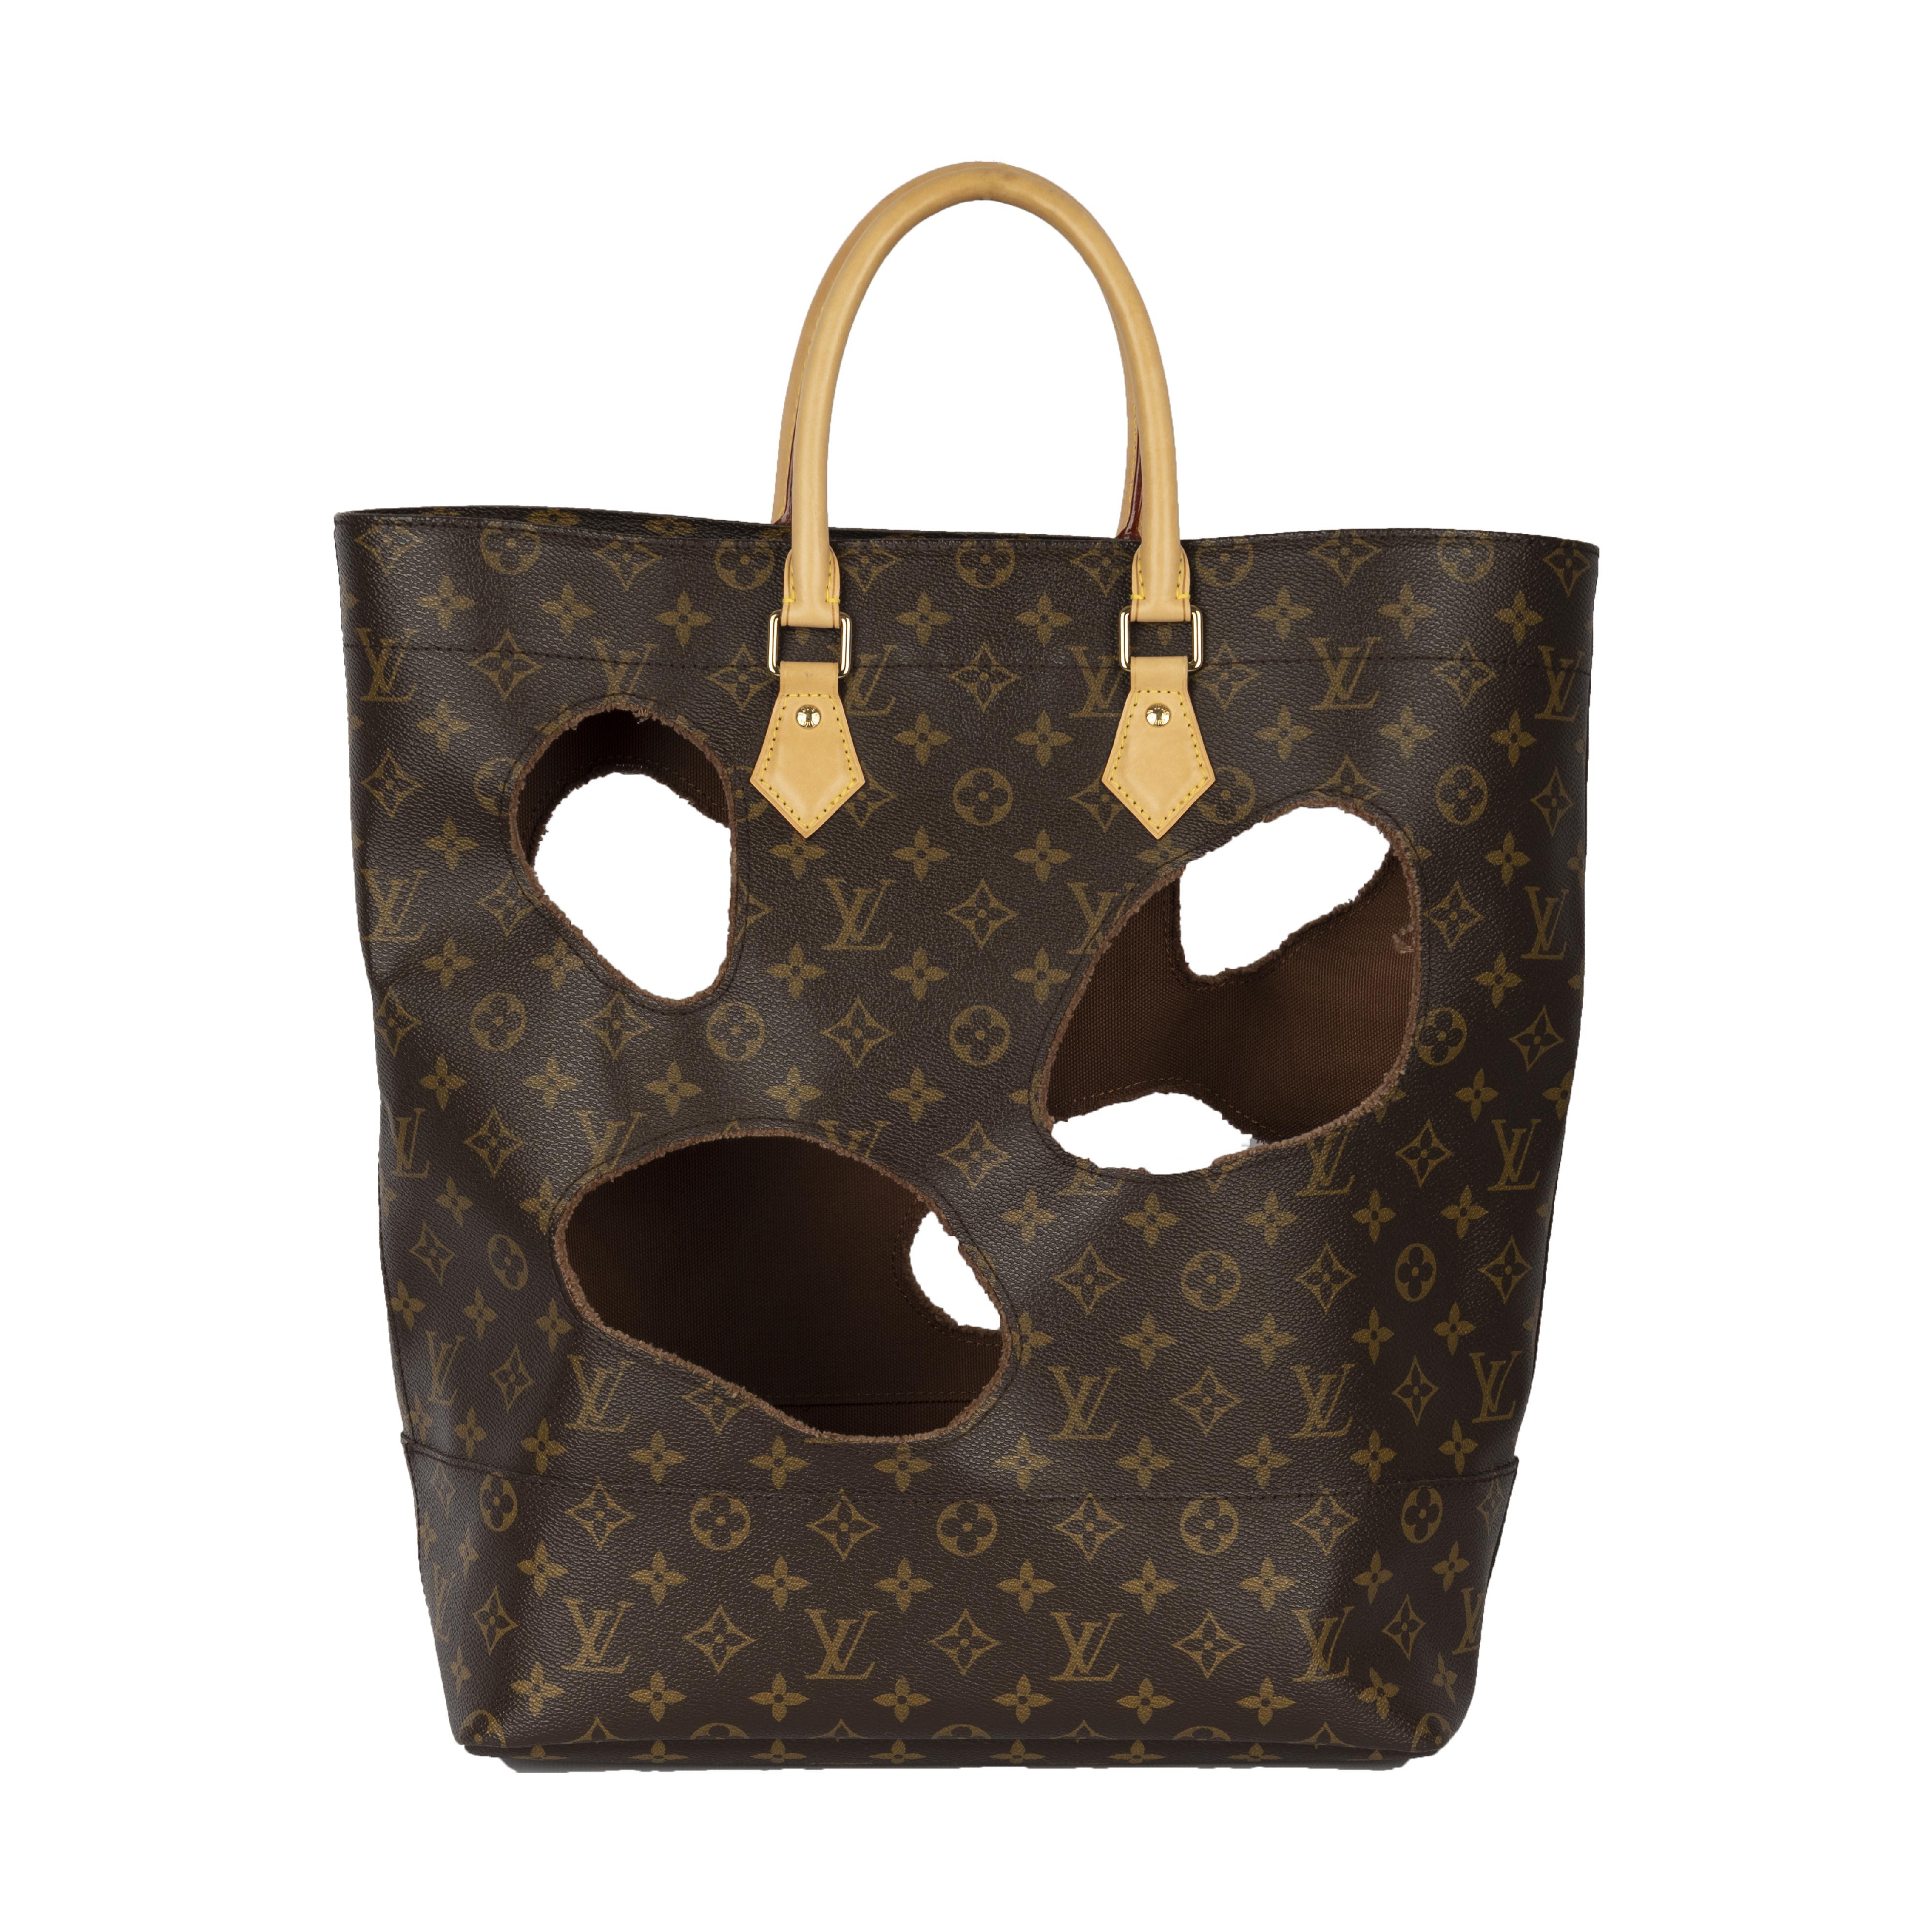 Featuring the Louis Vuitton emblem print, the Louis Vuitton x Comme des Garçons Burned Holes Monogram Tote bag was originally crafted in 2014. The cut-out detailing finely represents the burnt holes and the dust bag provided with the bag secures